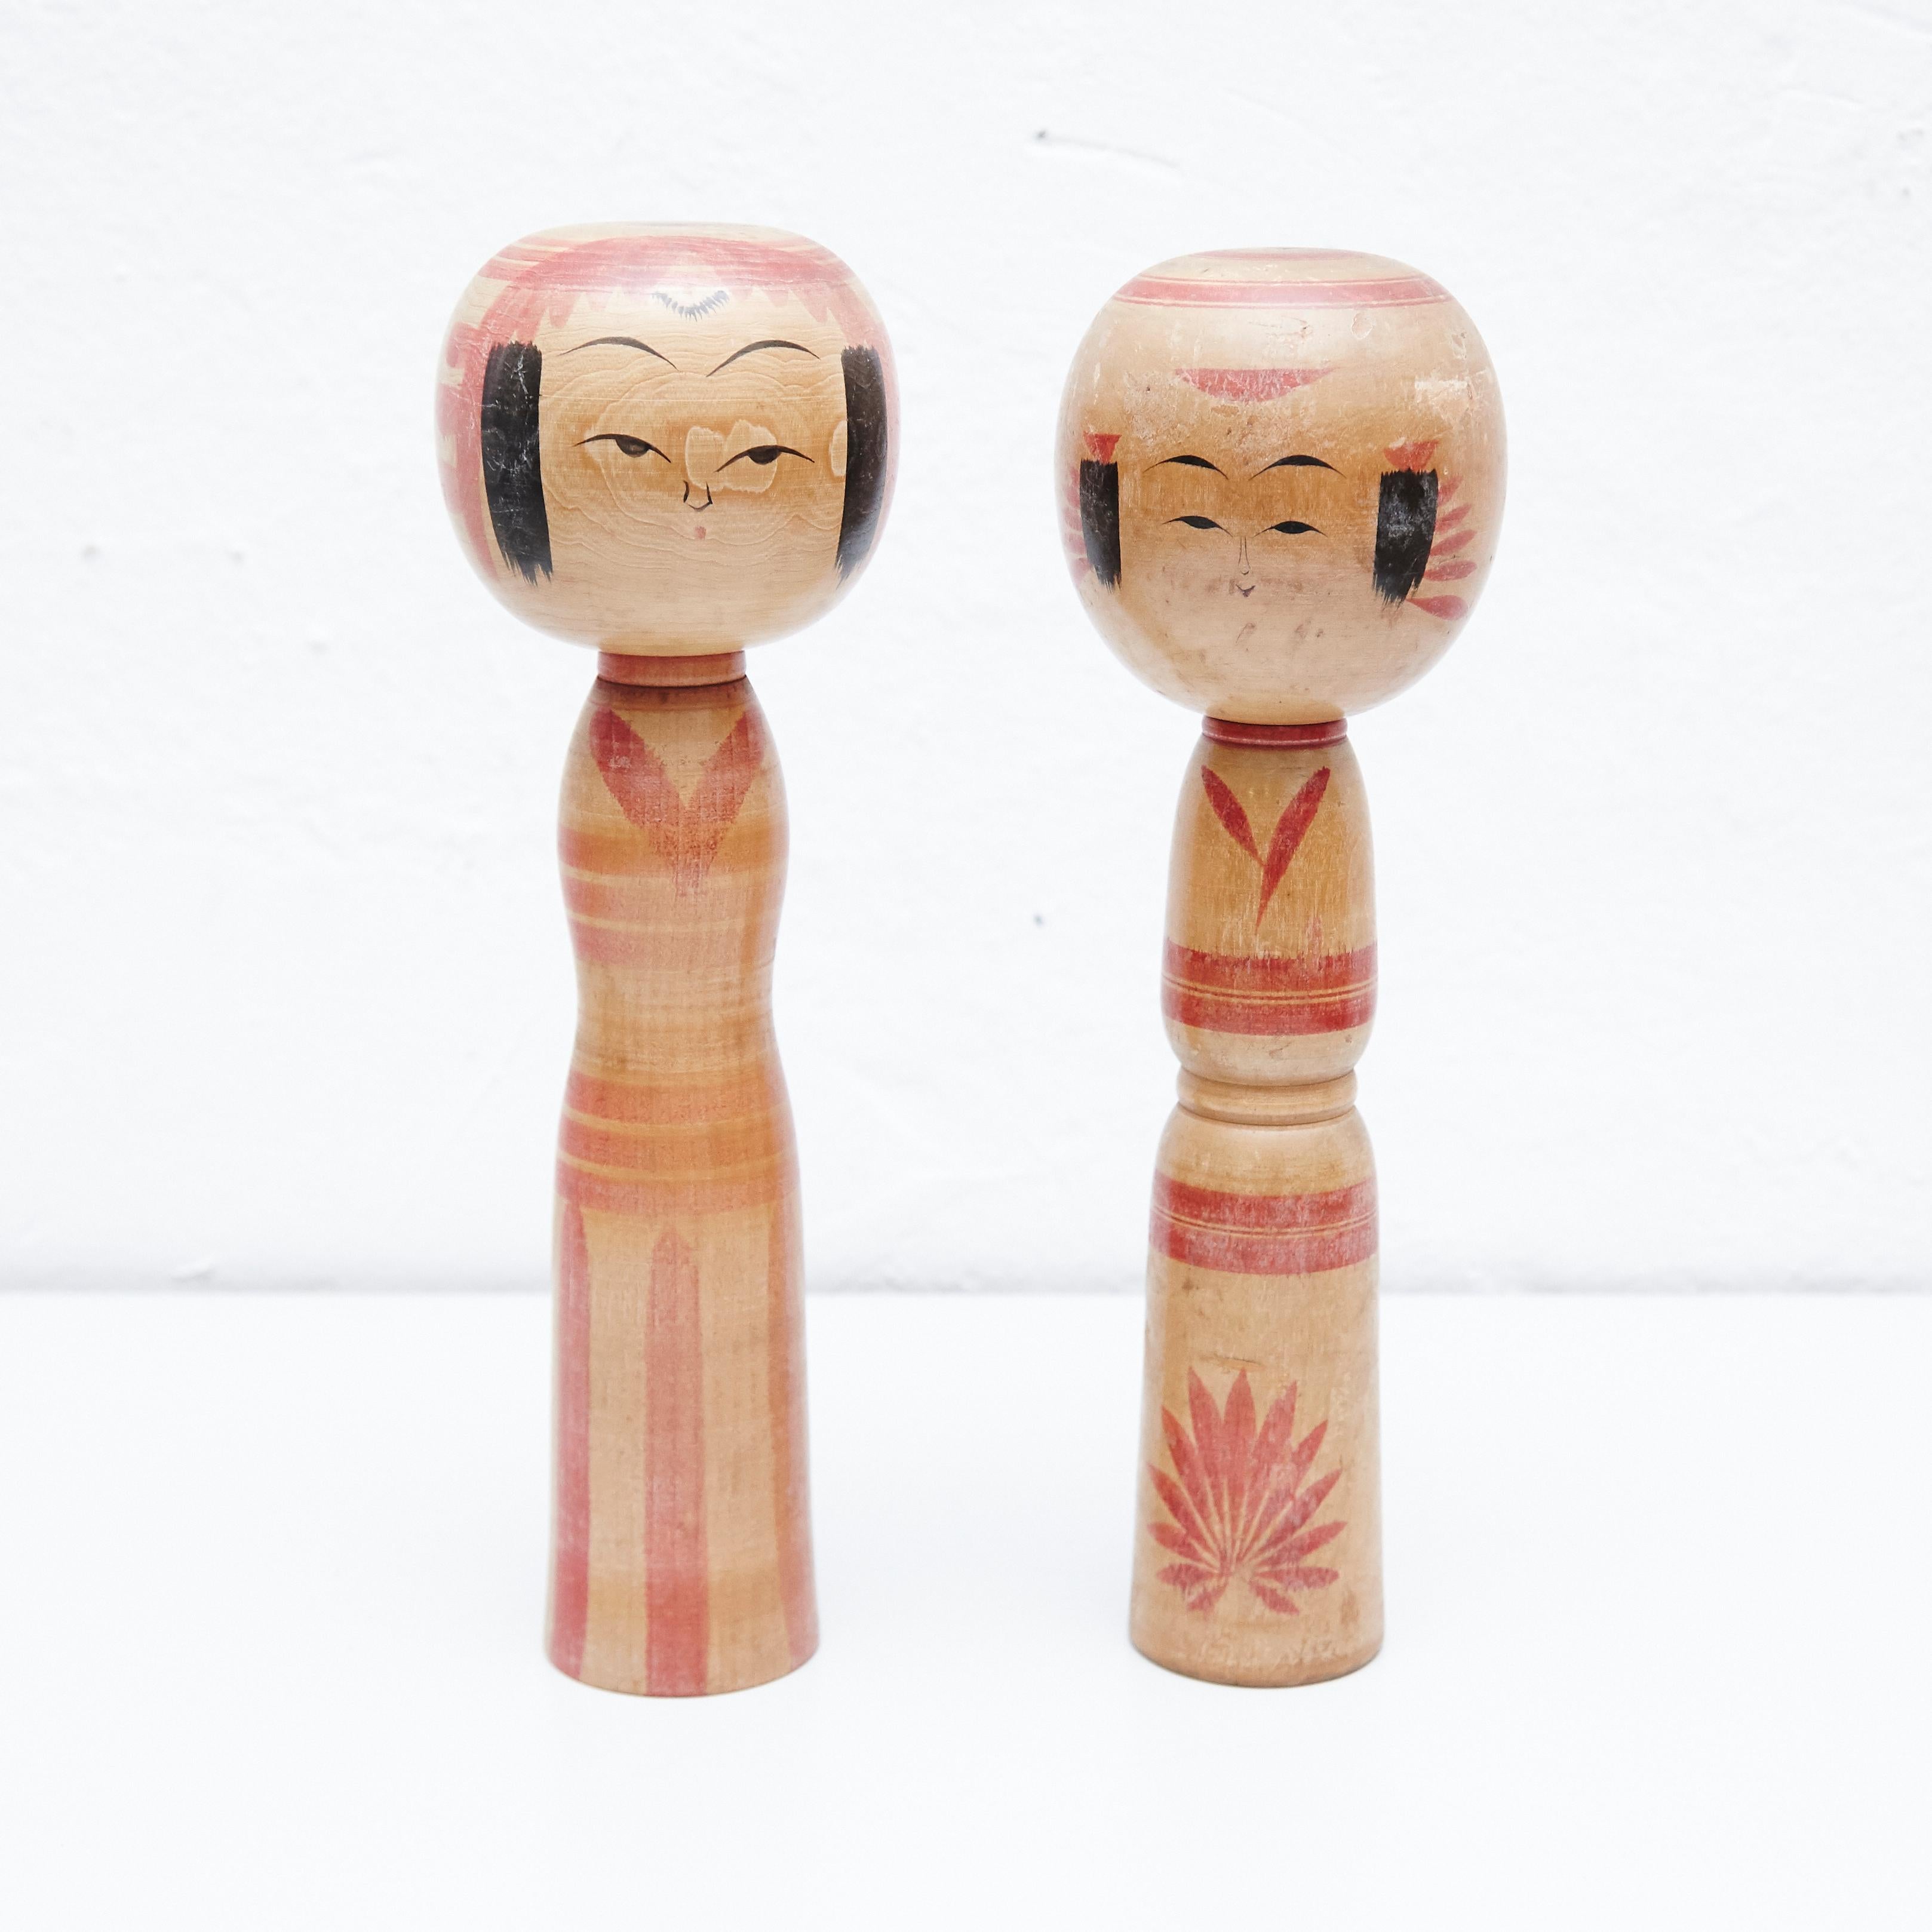 Japanese dolls called Kokeshi of the early 20th century.
Provenance from the northern Japan.
Set of 2.

Measures: 

31 x 9,5 cm
30 x 10cm


Handmade by Japanese artisants from wood. Have a simple trunk as a body and an enlarged head. One